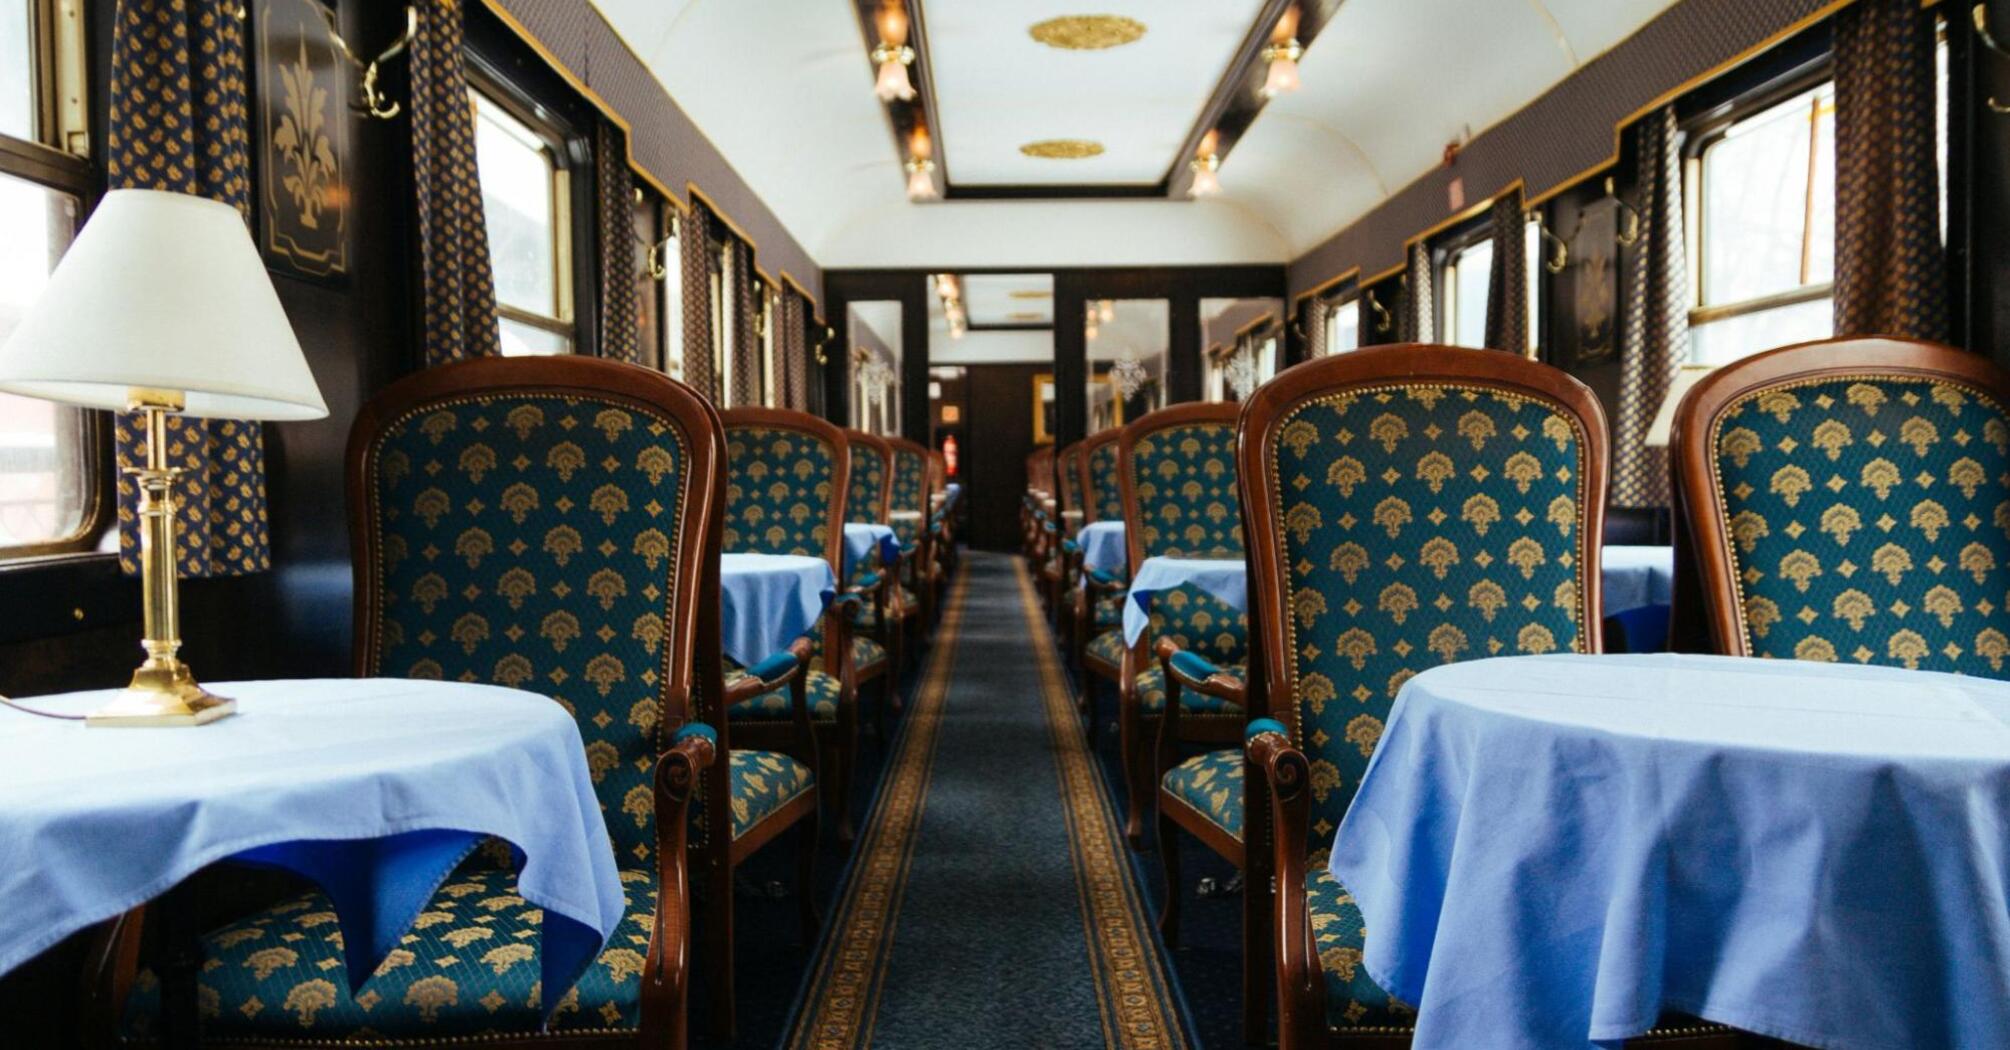 Luxurious train with blue tablecloths and patterned chairs